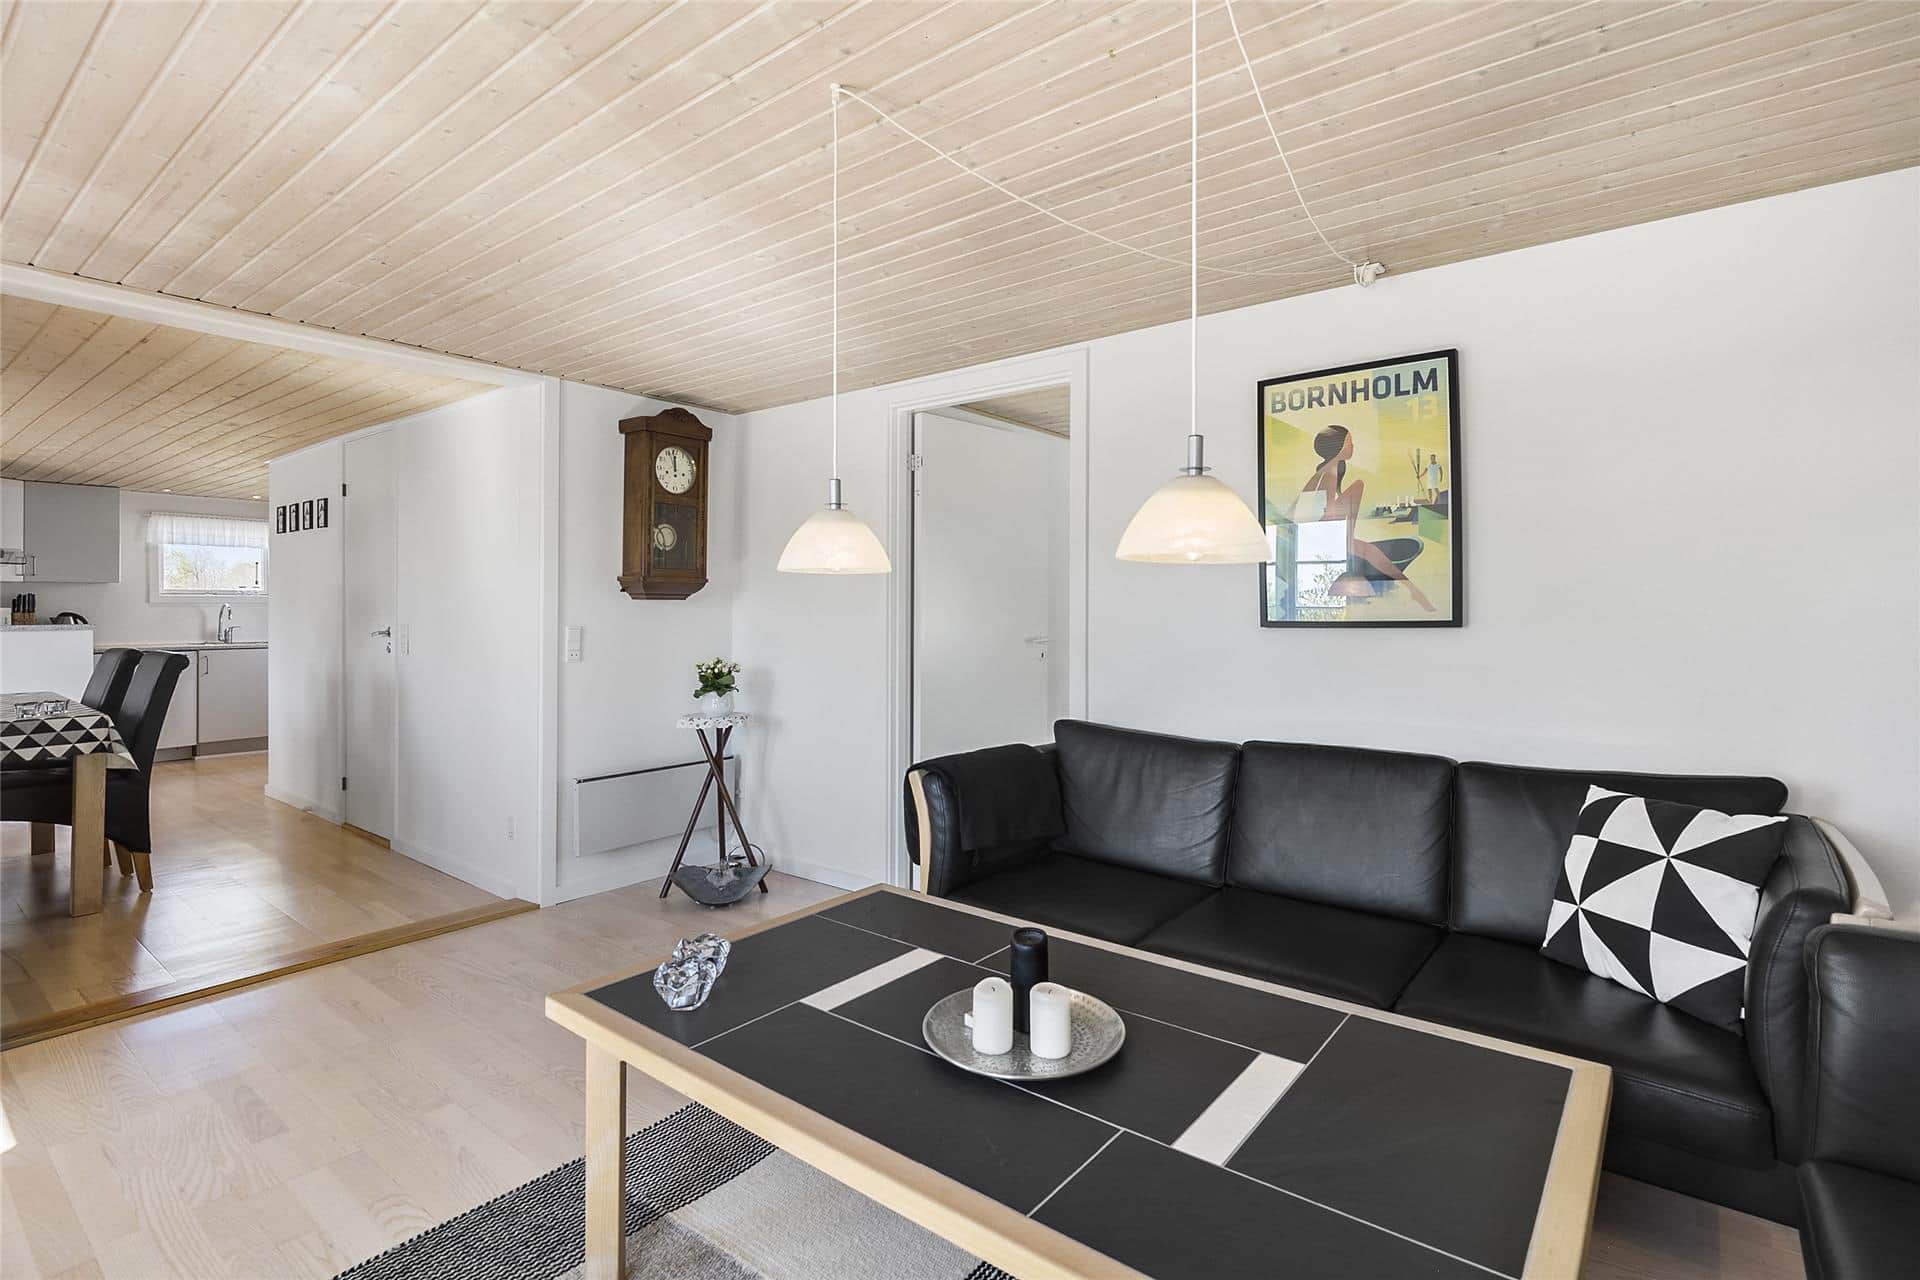 Image 1-10 Holiday-home 4712, Boderne 57, DK - 3720 Aakirkeby